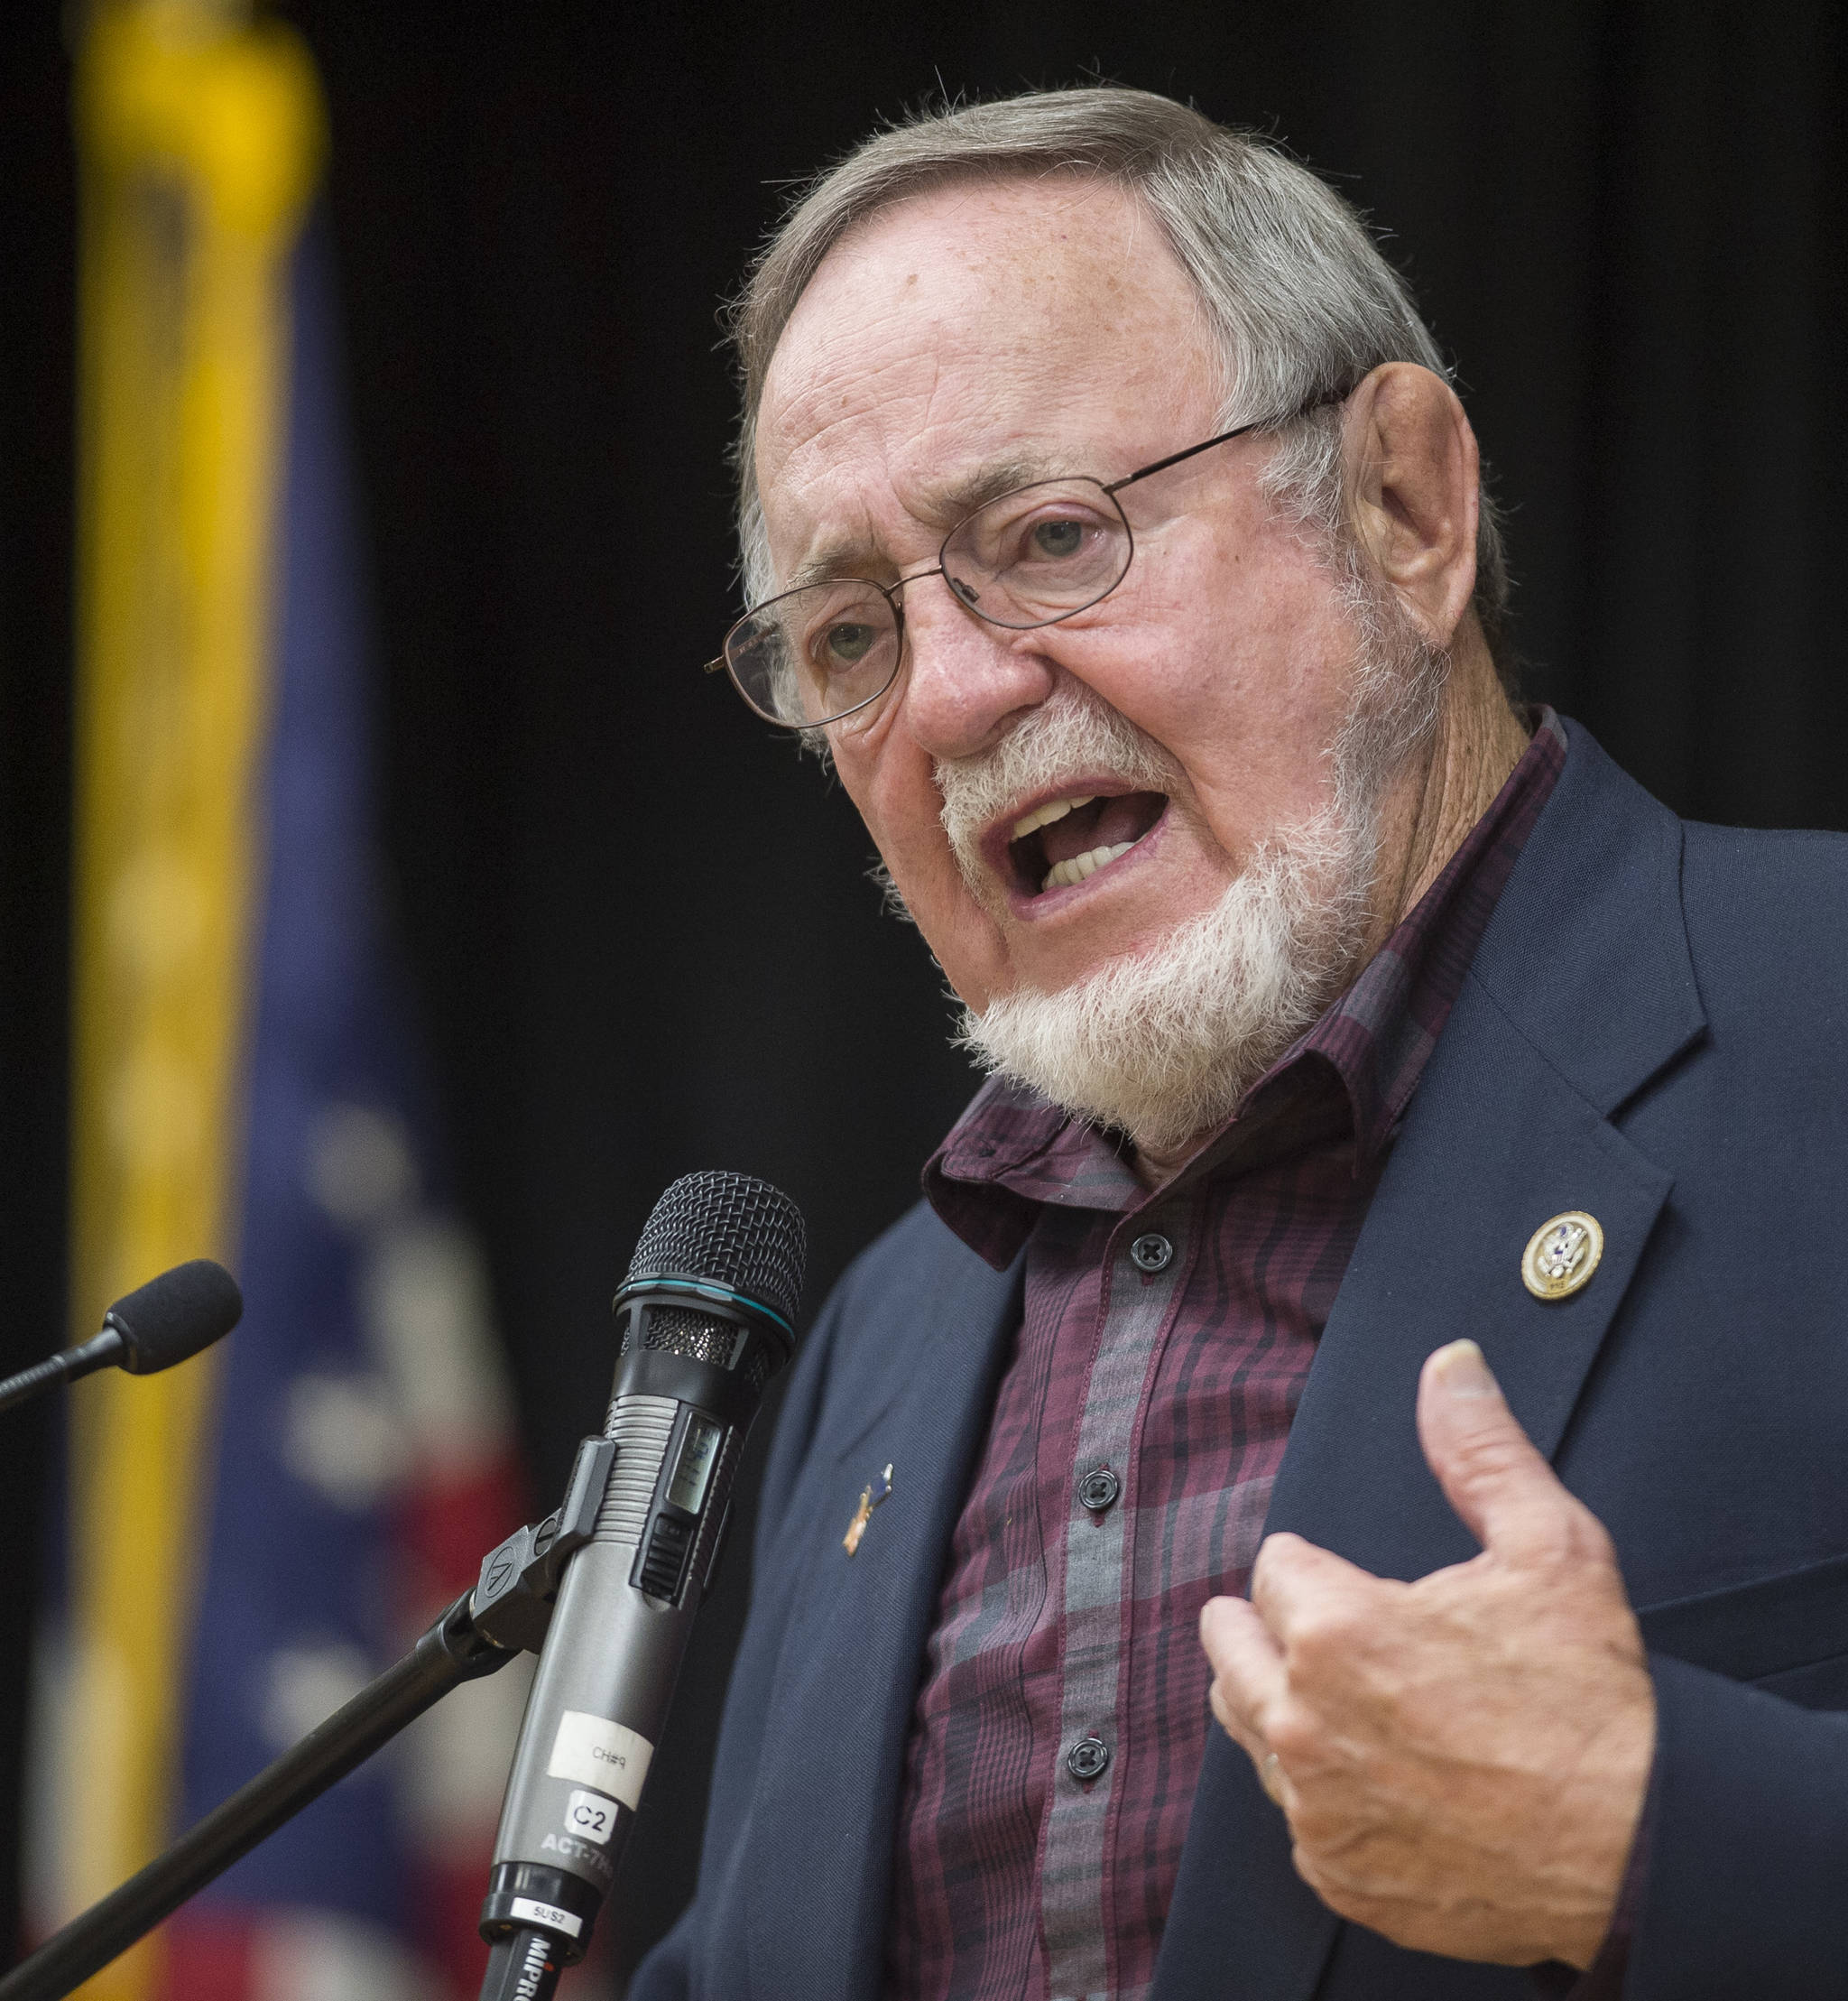 U.S. Rep. Don Young, R-Alaska, speaks at the Native Issues Forum at the Elizabeth Peratrovich Hall on Wednesday, August 1, 2018. (Michael Penn | Juneau Empire)